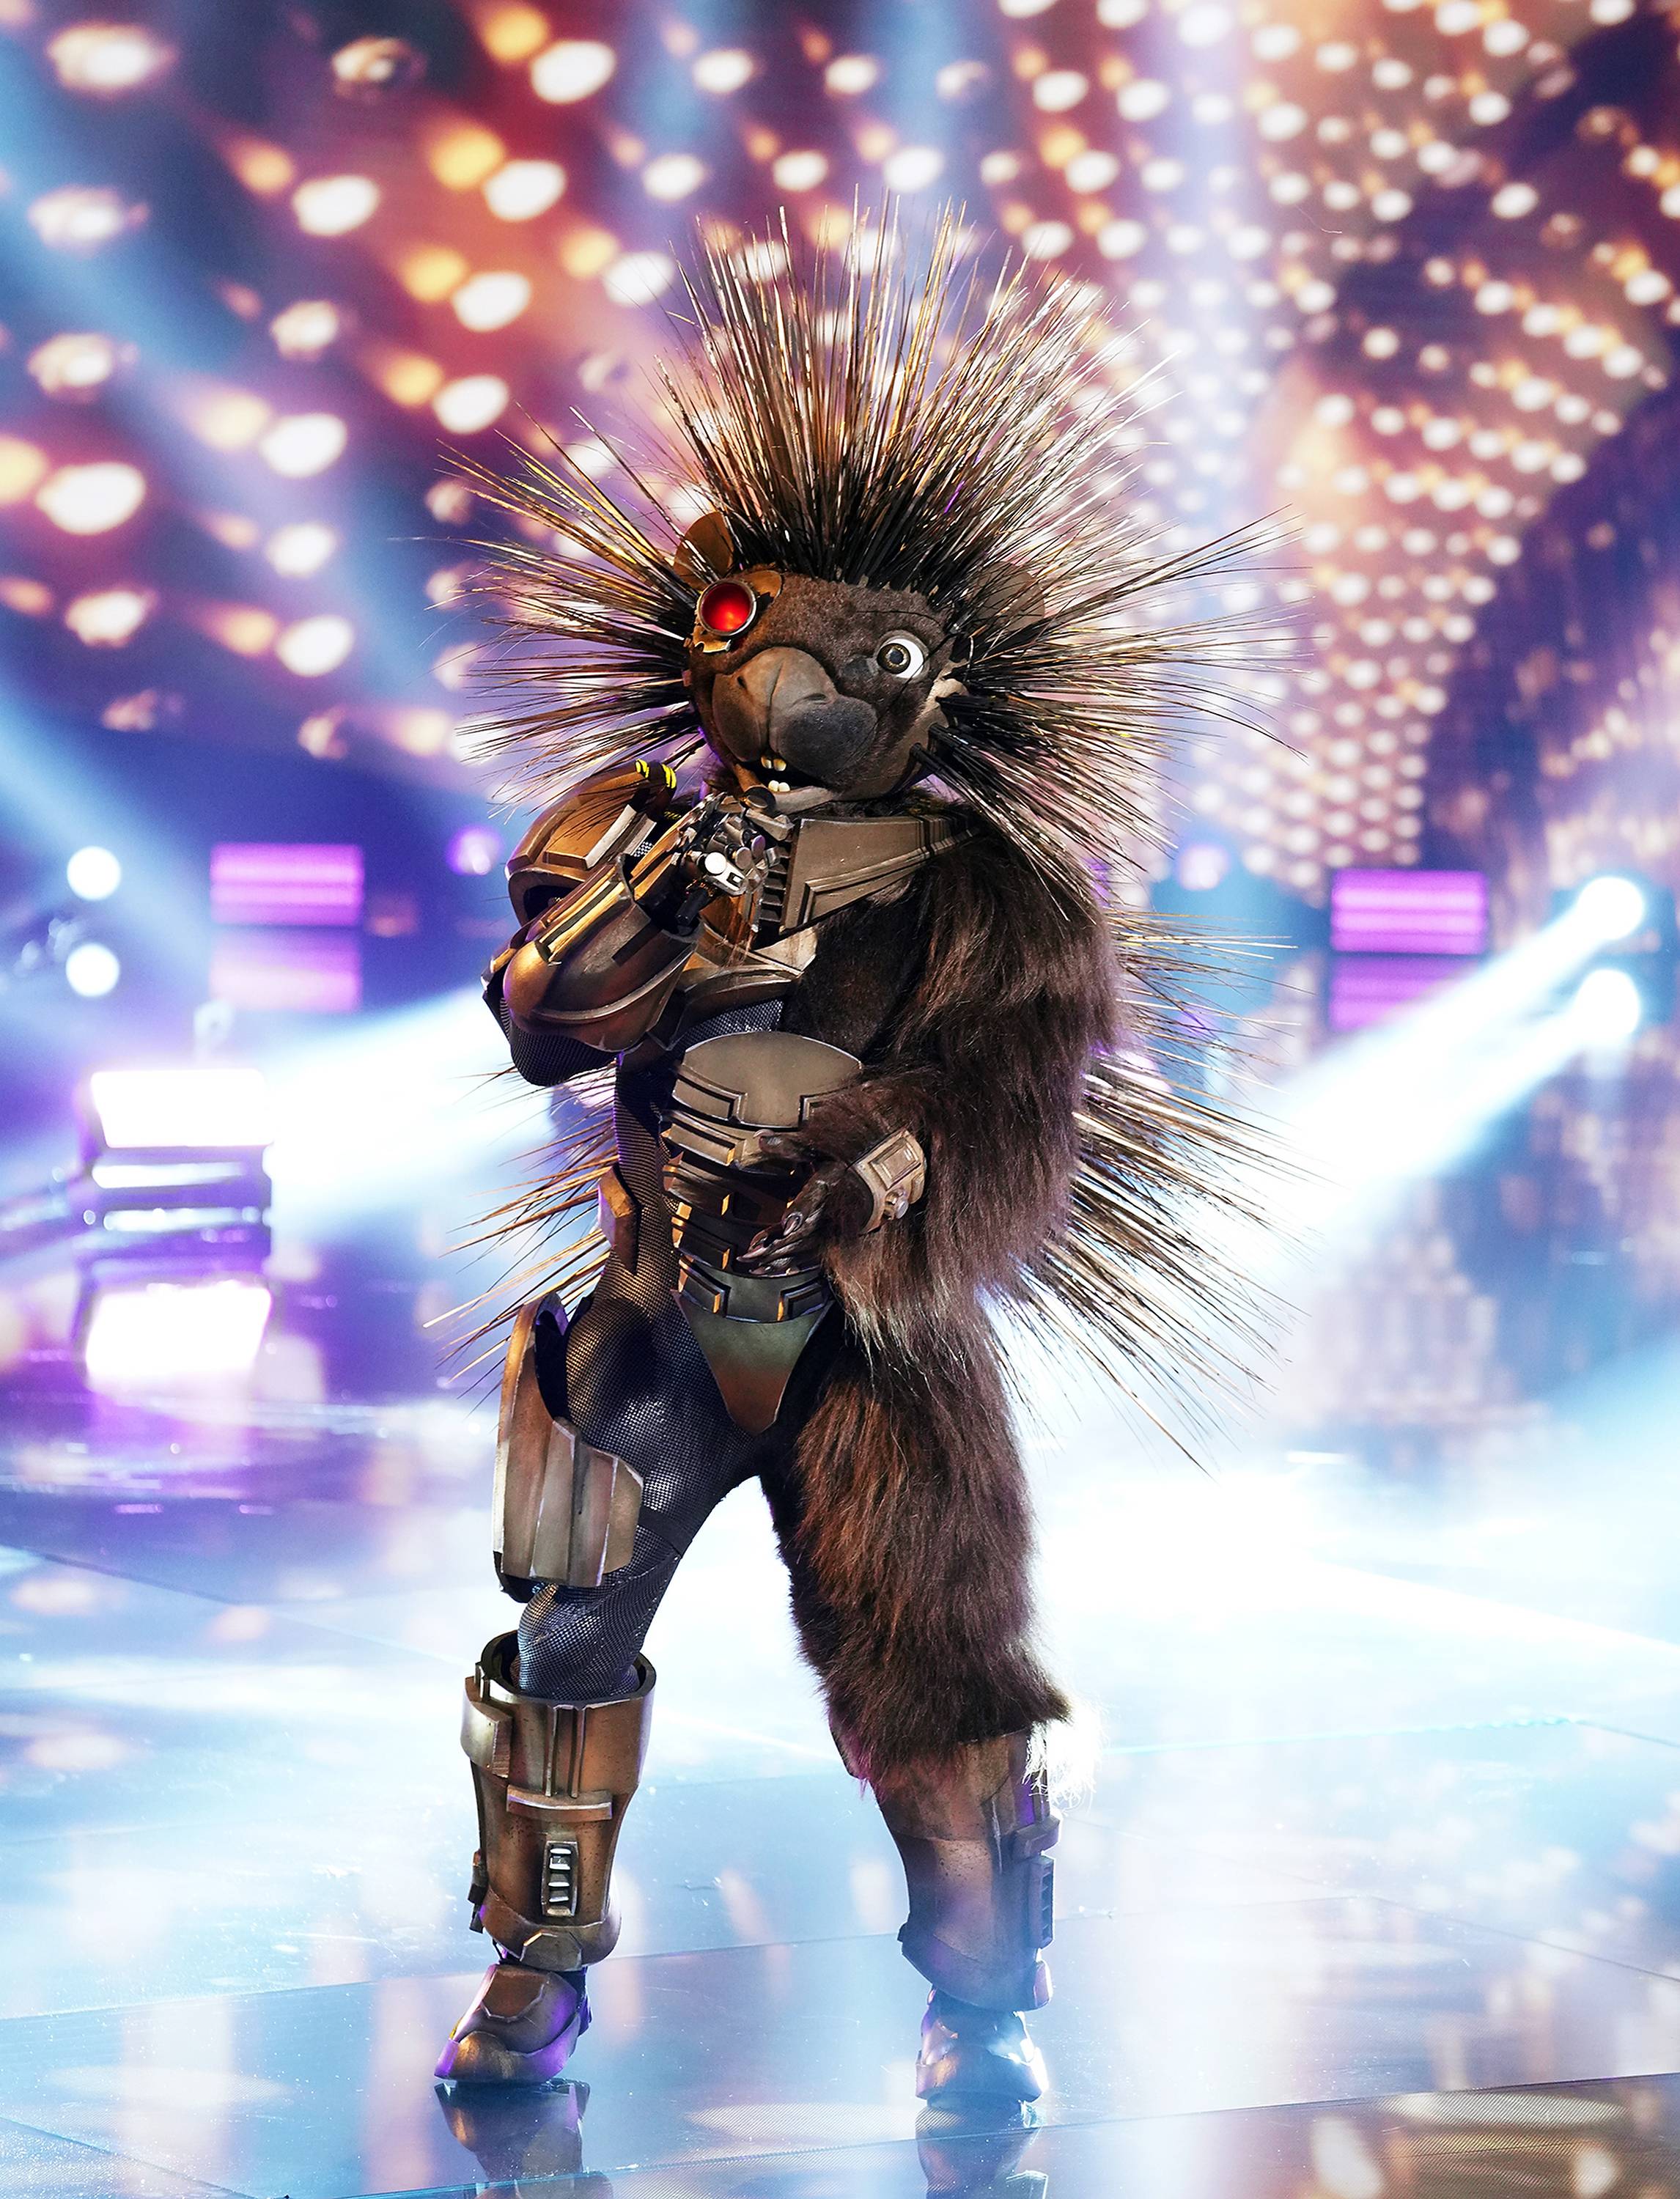 THE MASKED SINGER: Porcupine in the  Return Of The Masks season five premiere episode of THE MASKED SINGER airing Wednesday, March 10 (8:00-9:00PM ET/PT). (Photo by FOX via Getty Images)